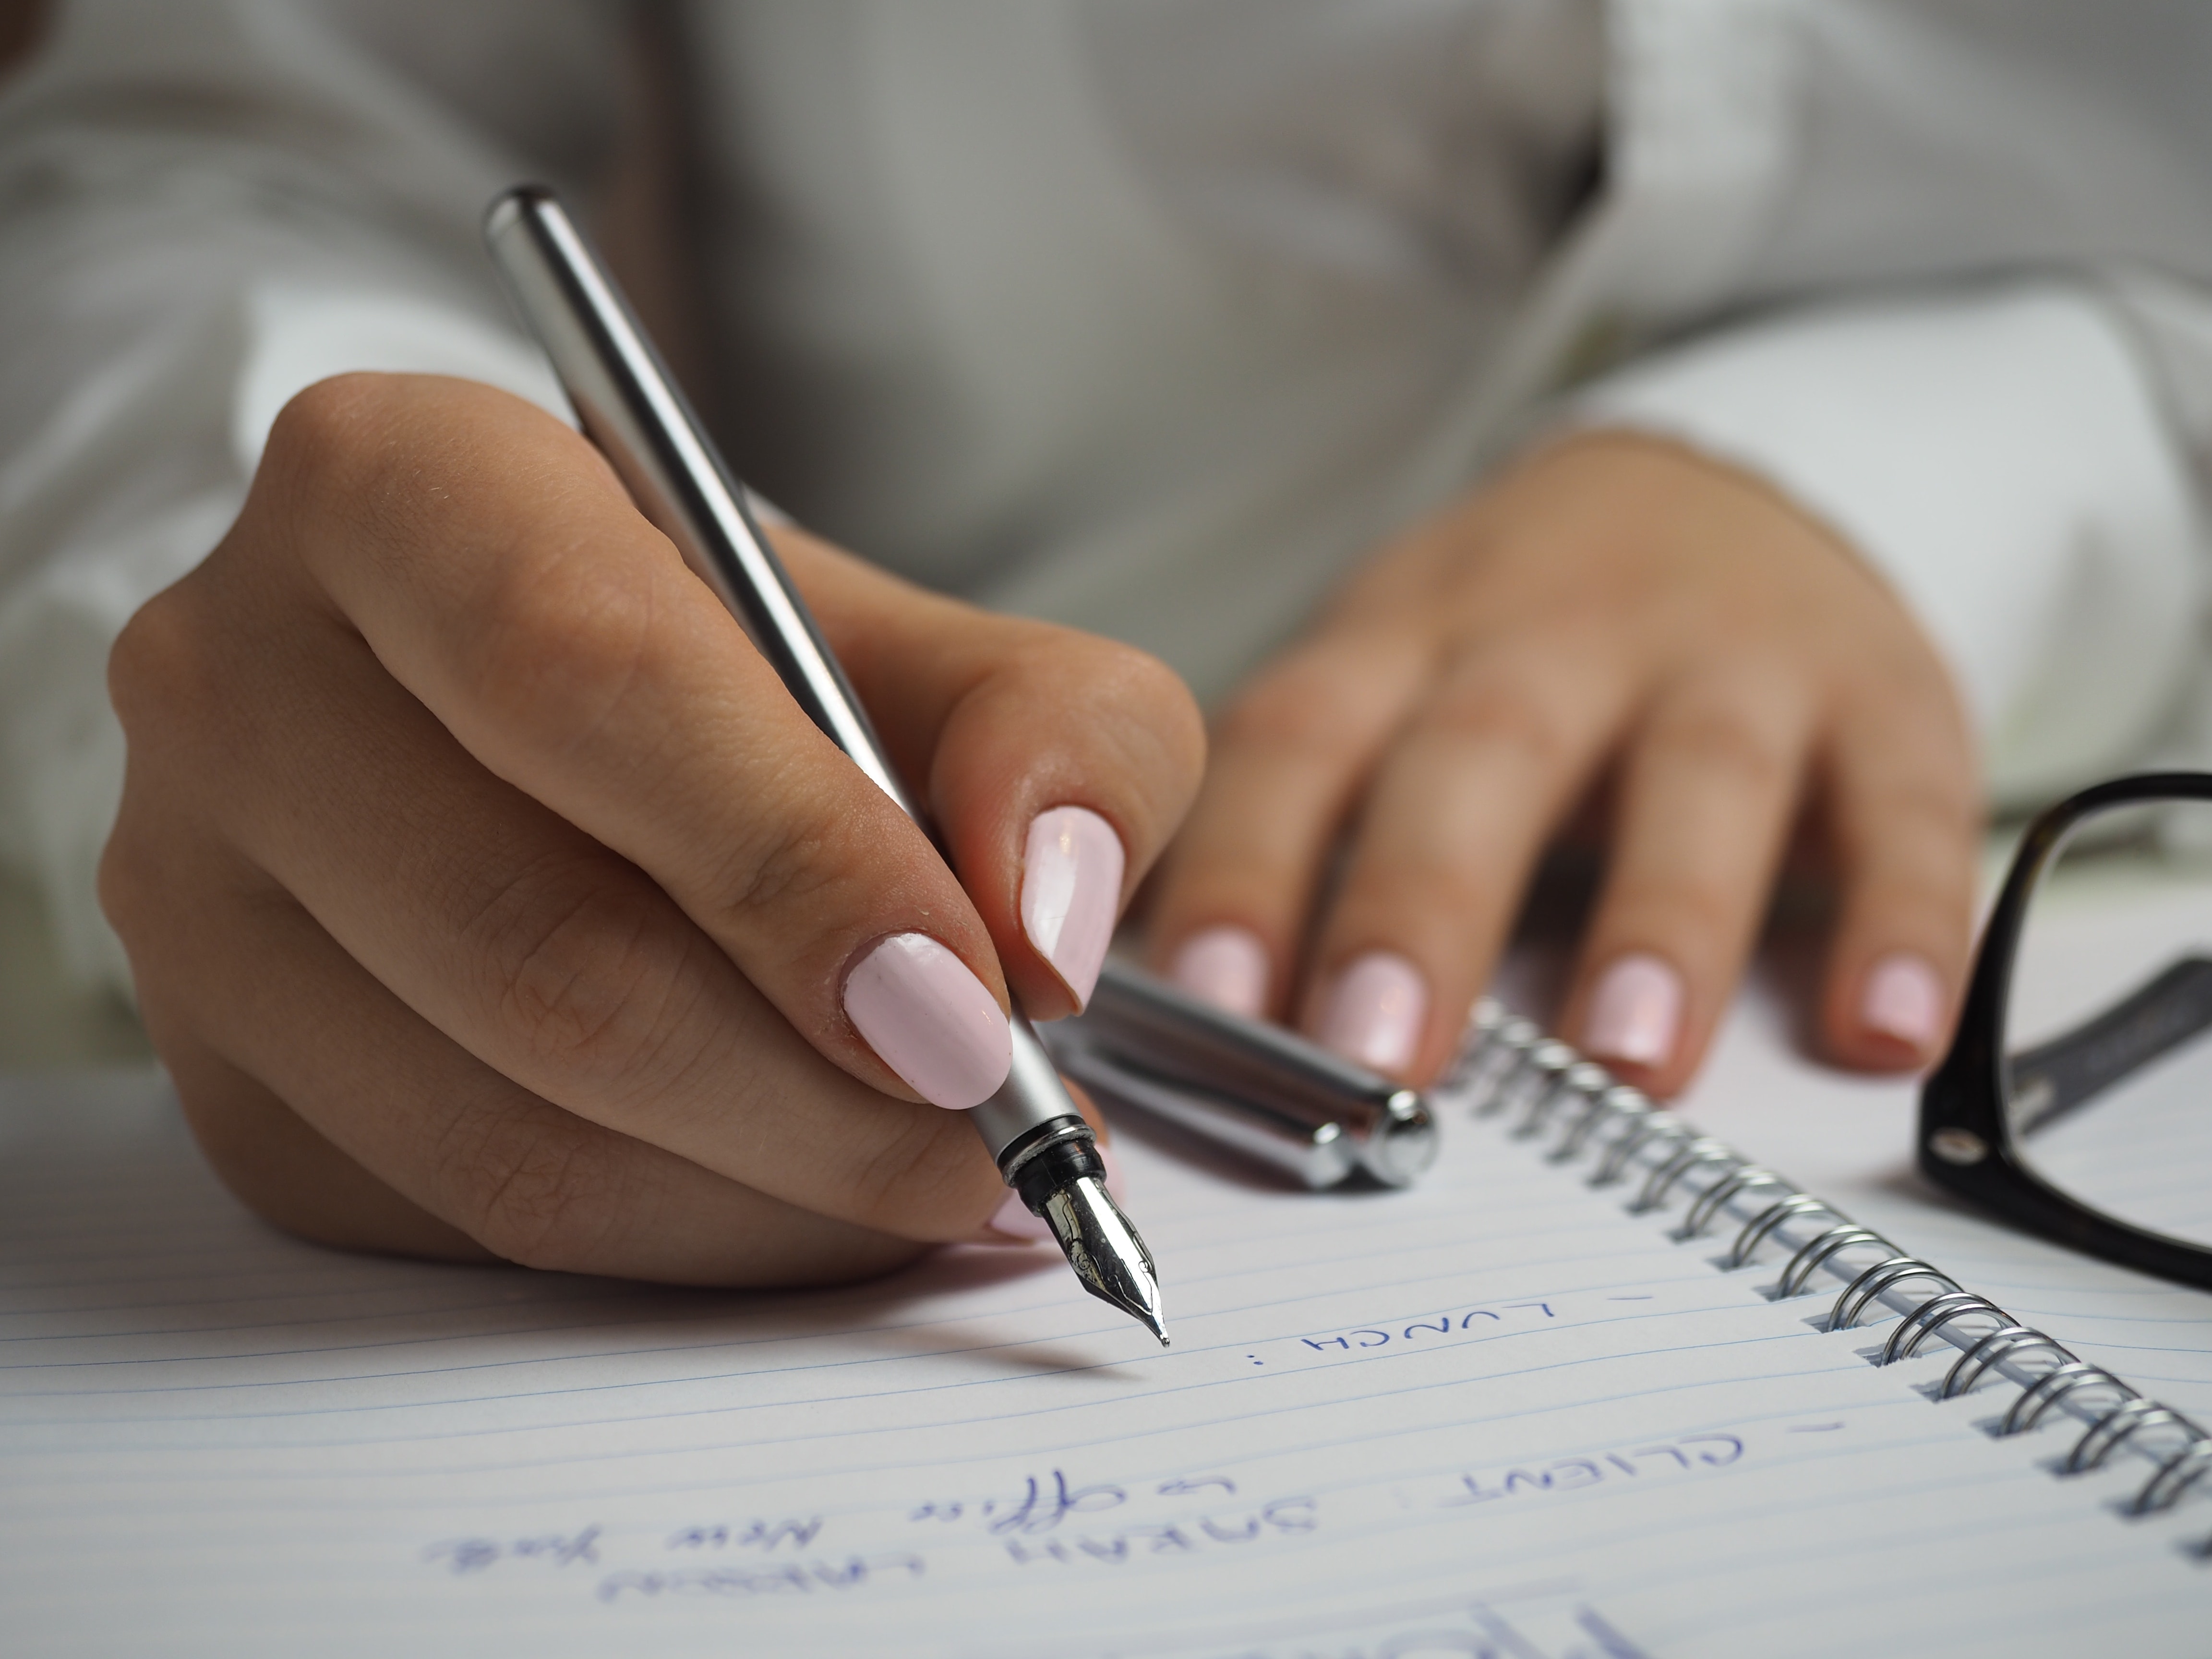 Woman in White Long Sleeved Shirt Holding a Pen Writing on a Paper, Agenda, Composition, Fountain pen, Hands, HQ Photo